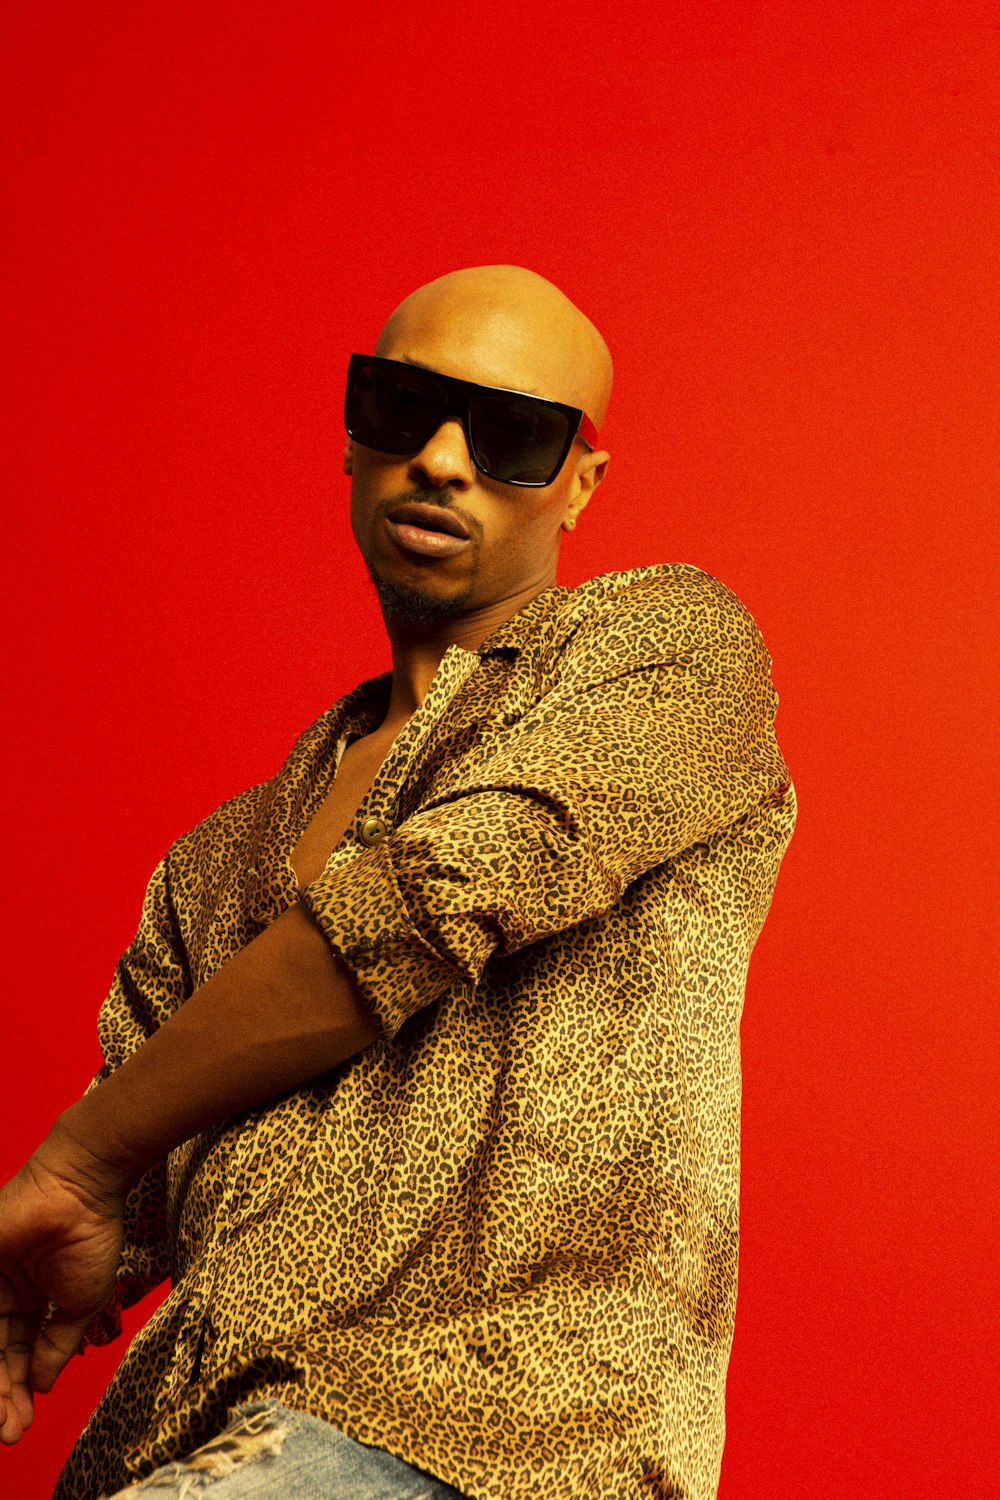 a man with a bald head wearing sunglasses